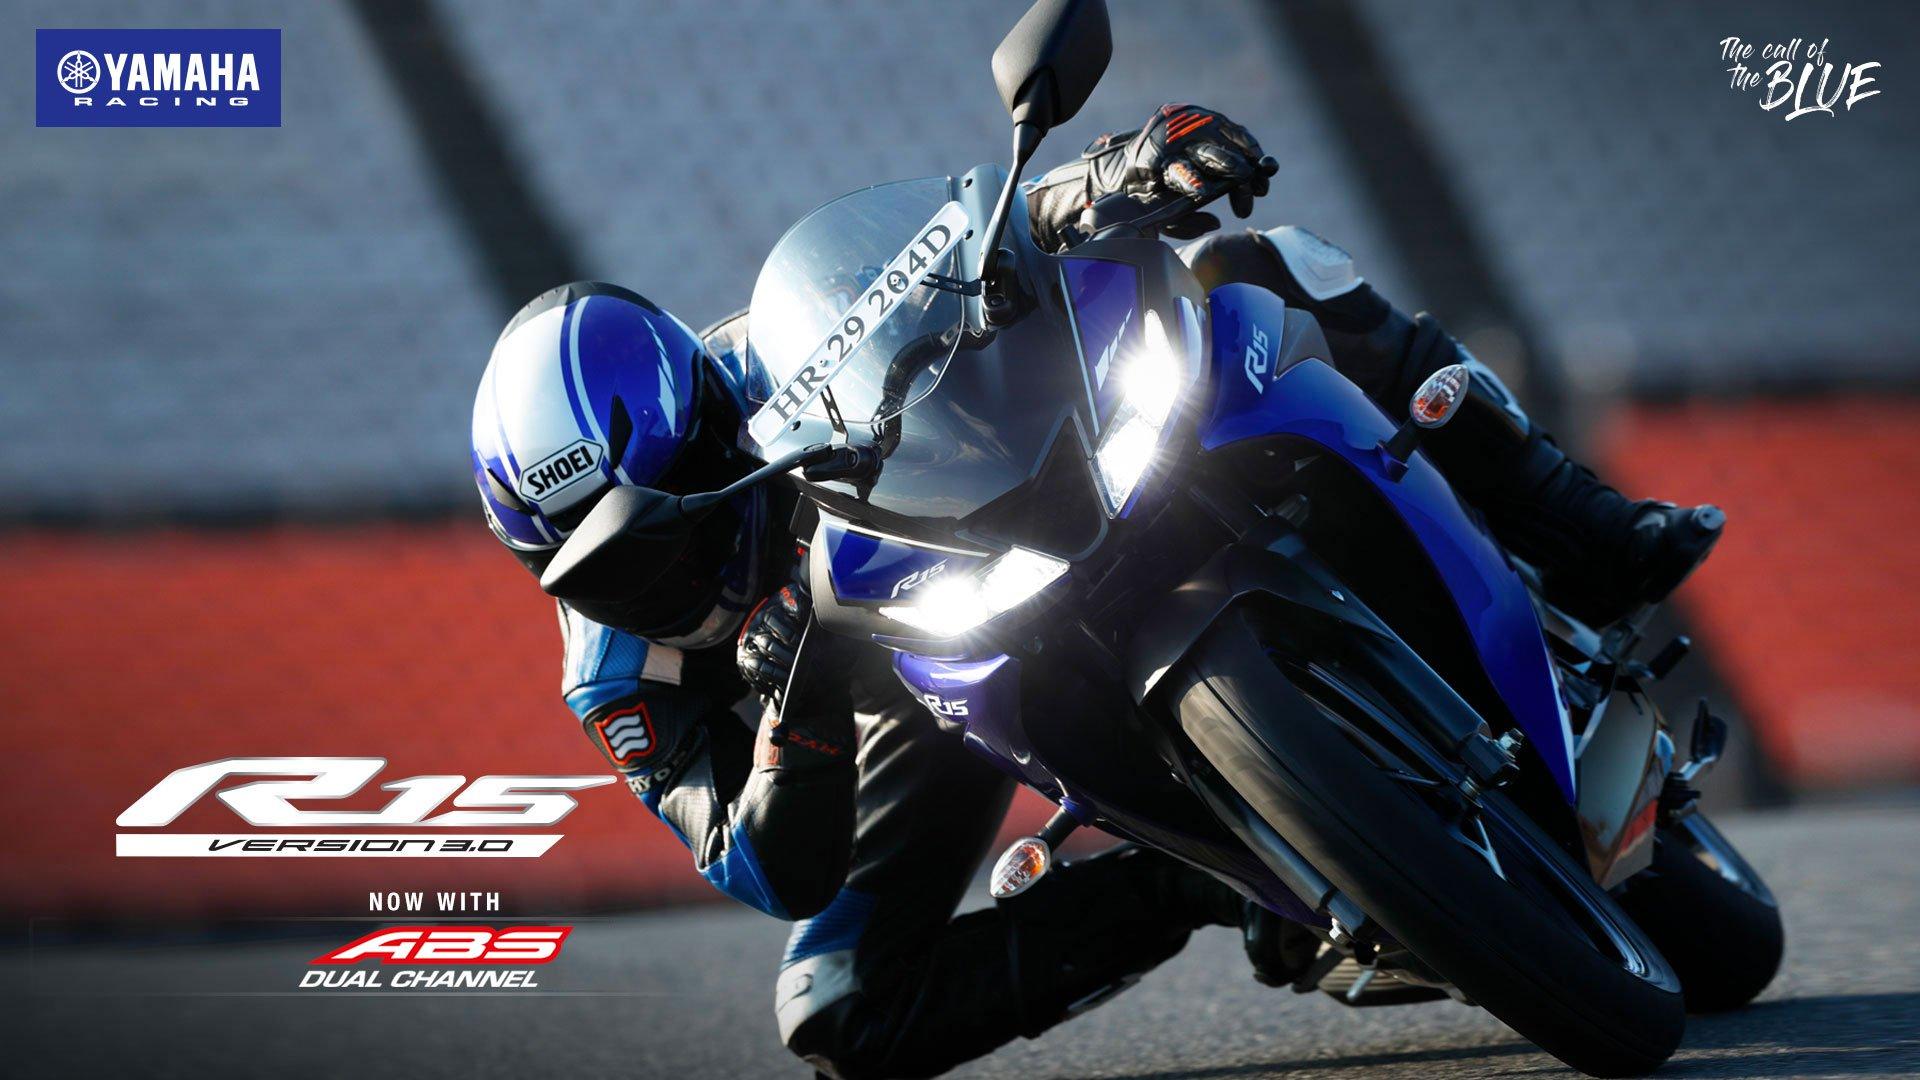 YAMAHA R15 V.3 PRICE IN NEPAL Rs. 900